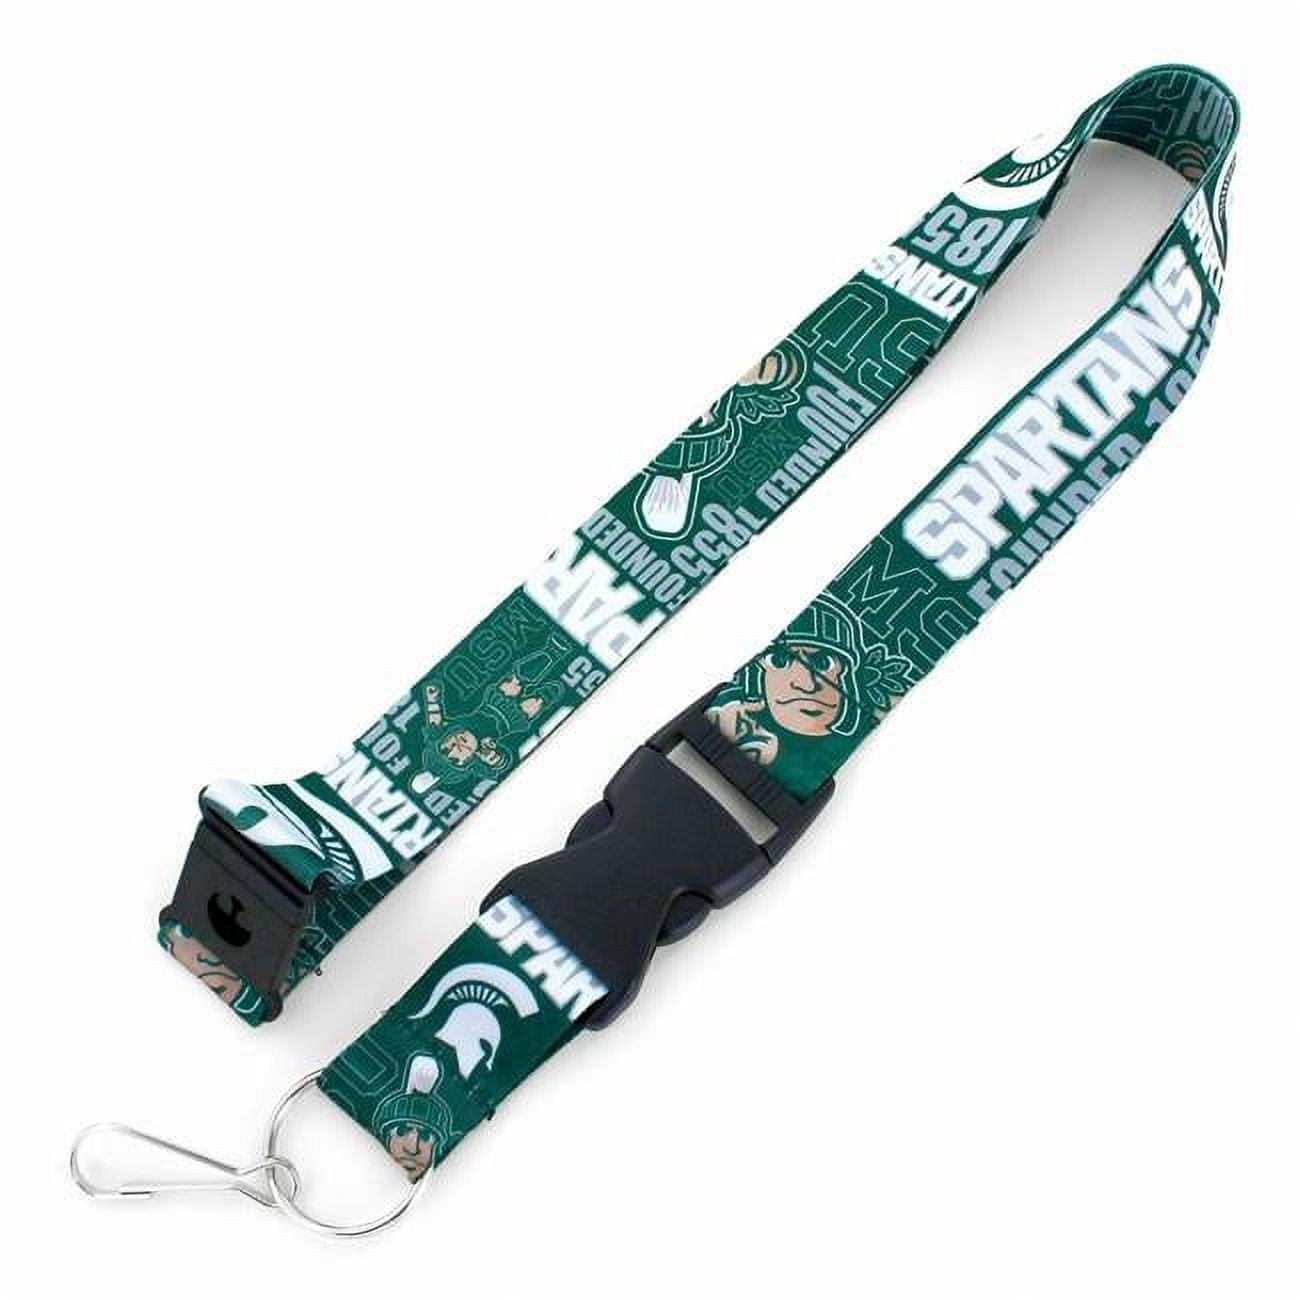 Picture of Amo 6326489163 Michigan State Spartans Lanyard Breakaway Style Dynamic Design